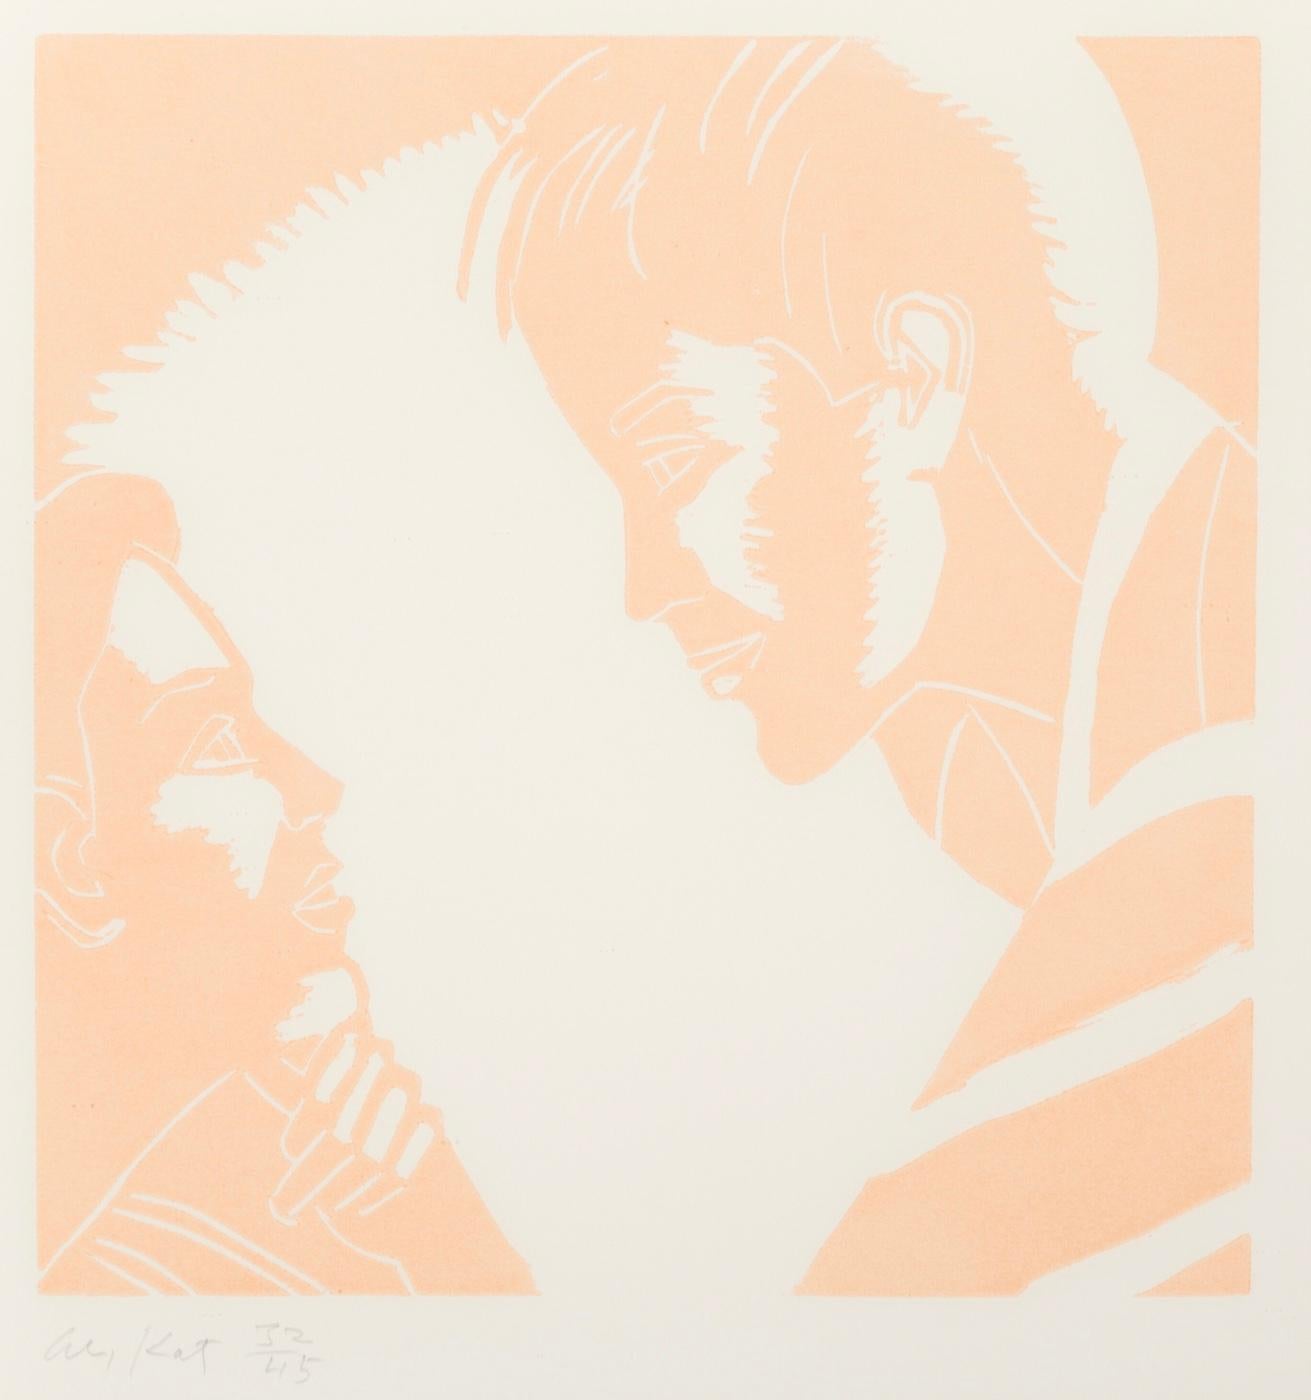 ALEX KATZ (1927-Present)

This Alex Katz untitled work from the 'A Tremor in the Morning' is a woodcut relief print in color on wove paper. This print is edition 32/45 and signed in graphite on the lower left. This piece is in excellent condition